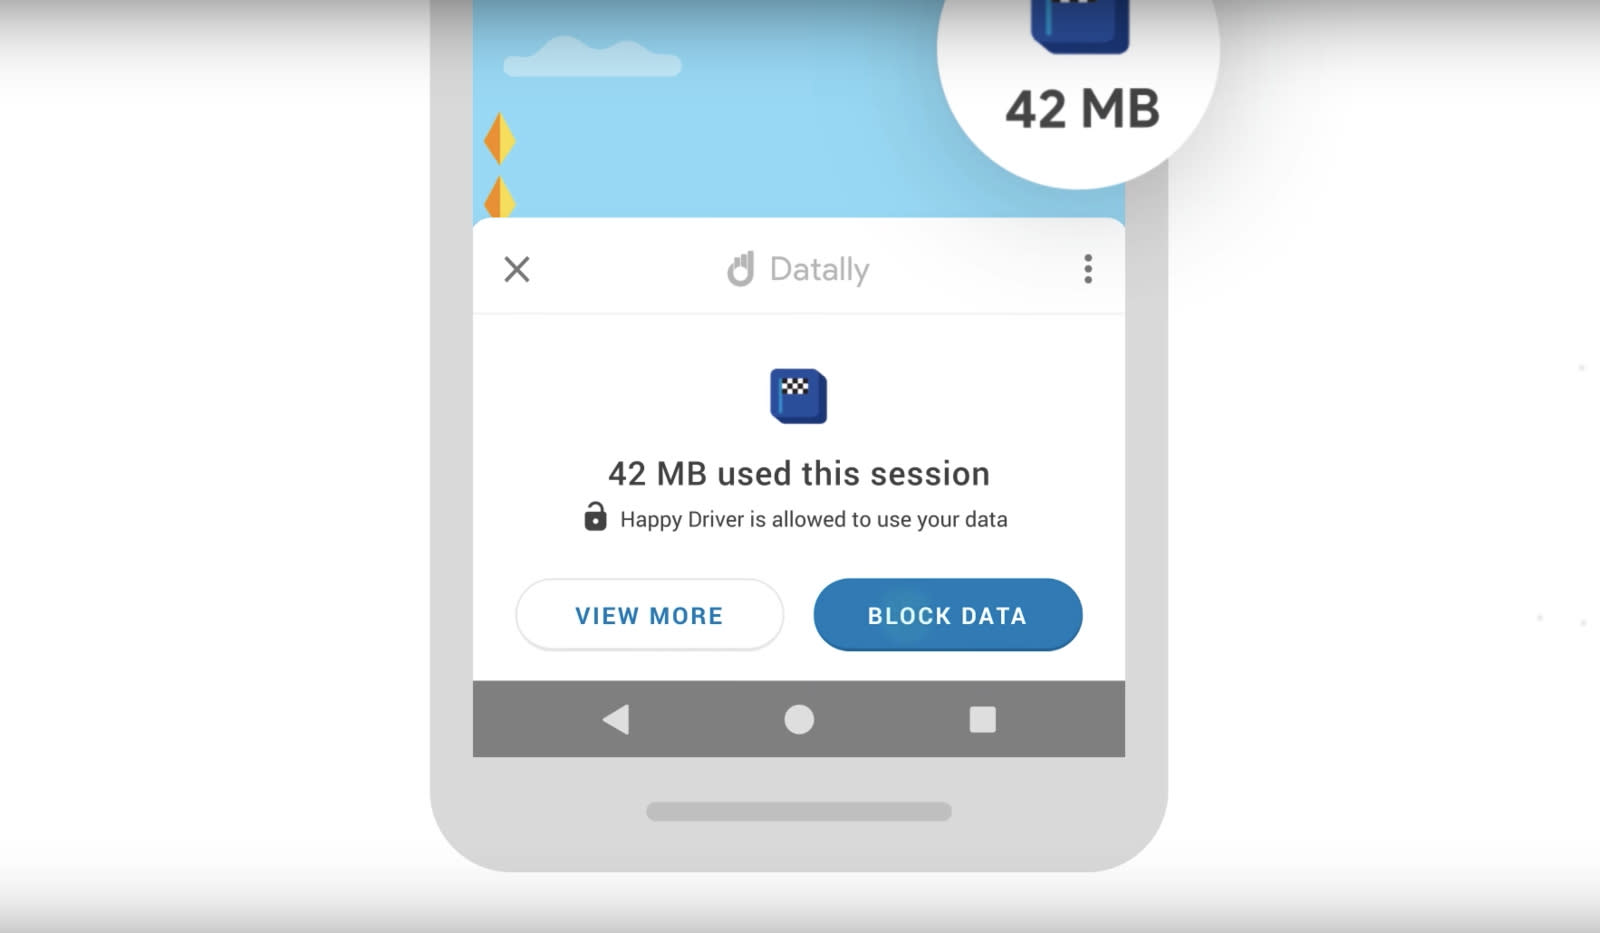 Google S Datally Can Help Limit Your Data Usage Engadget